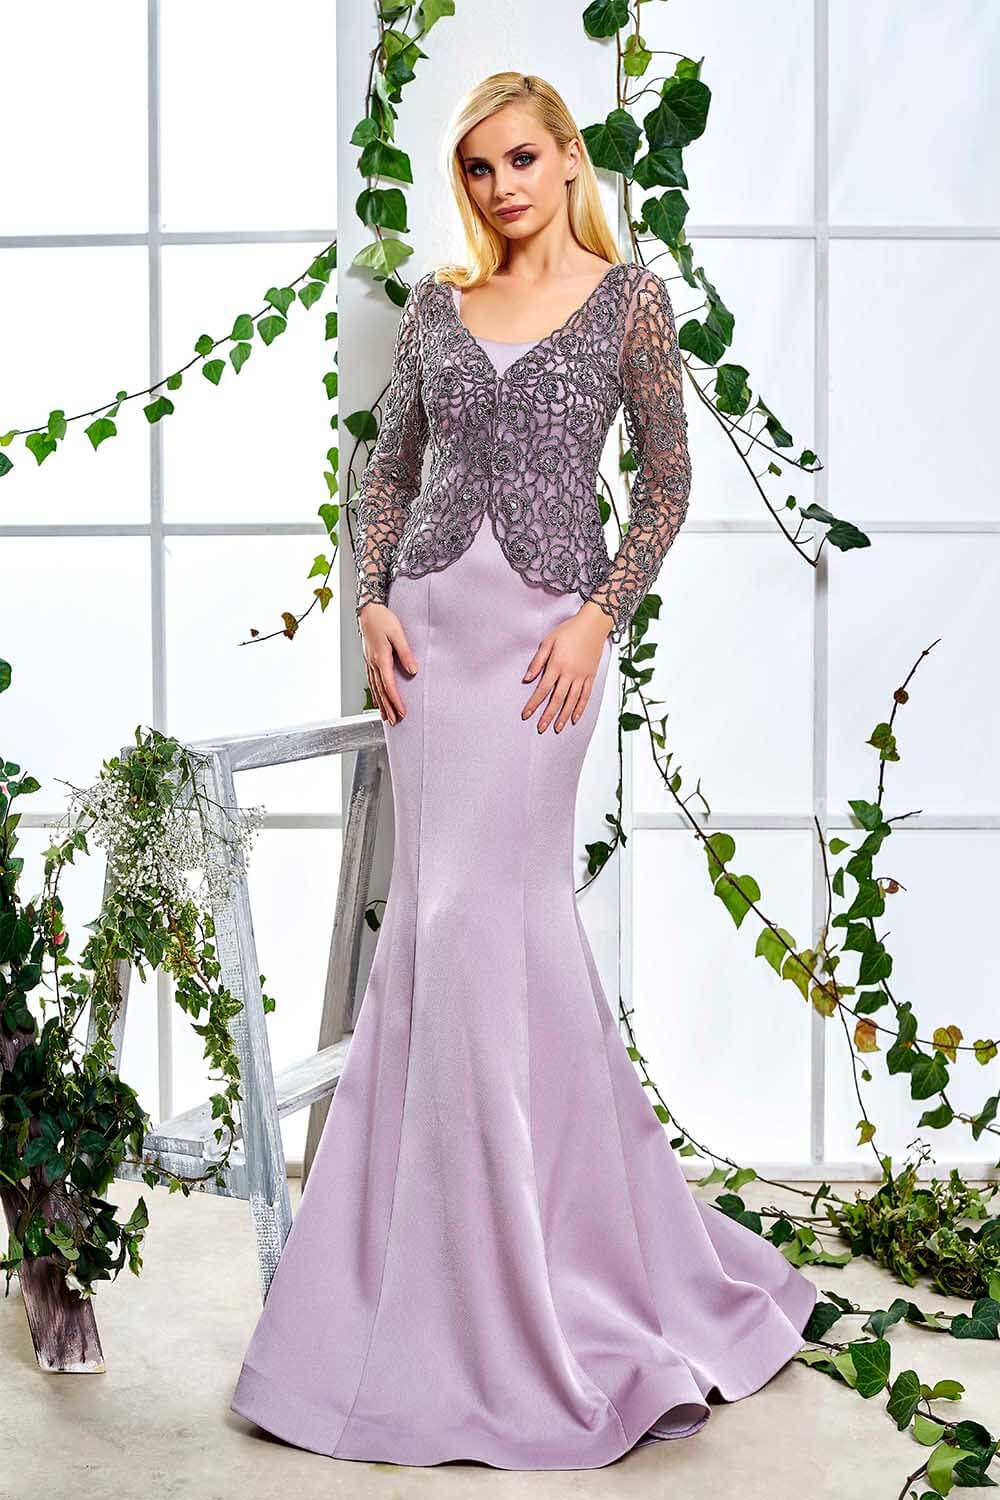 Stone Embroidered Long Sleeve Lilac Evening Dress